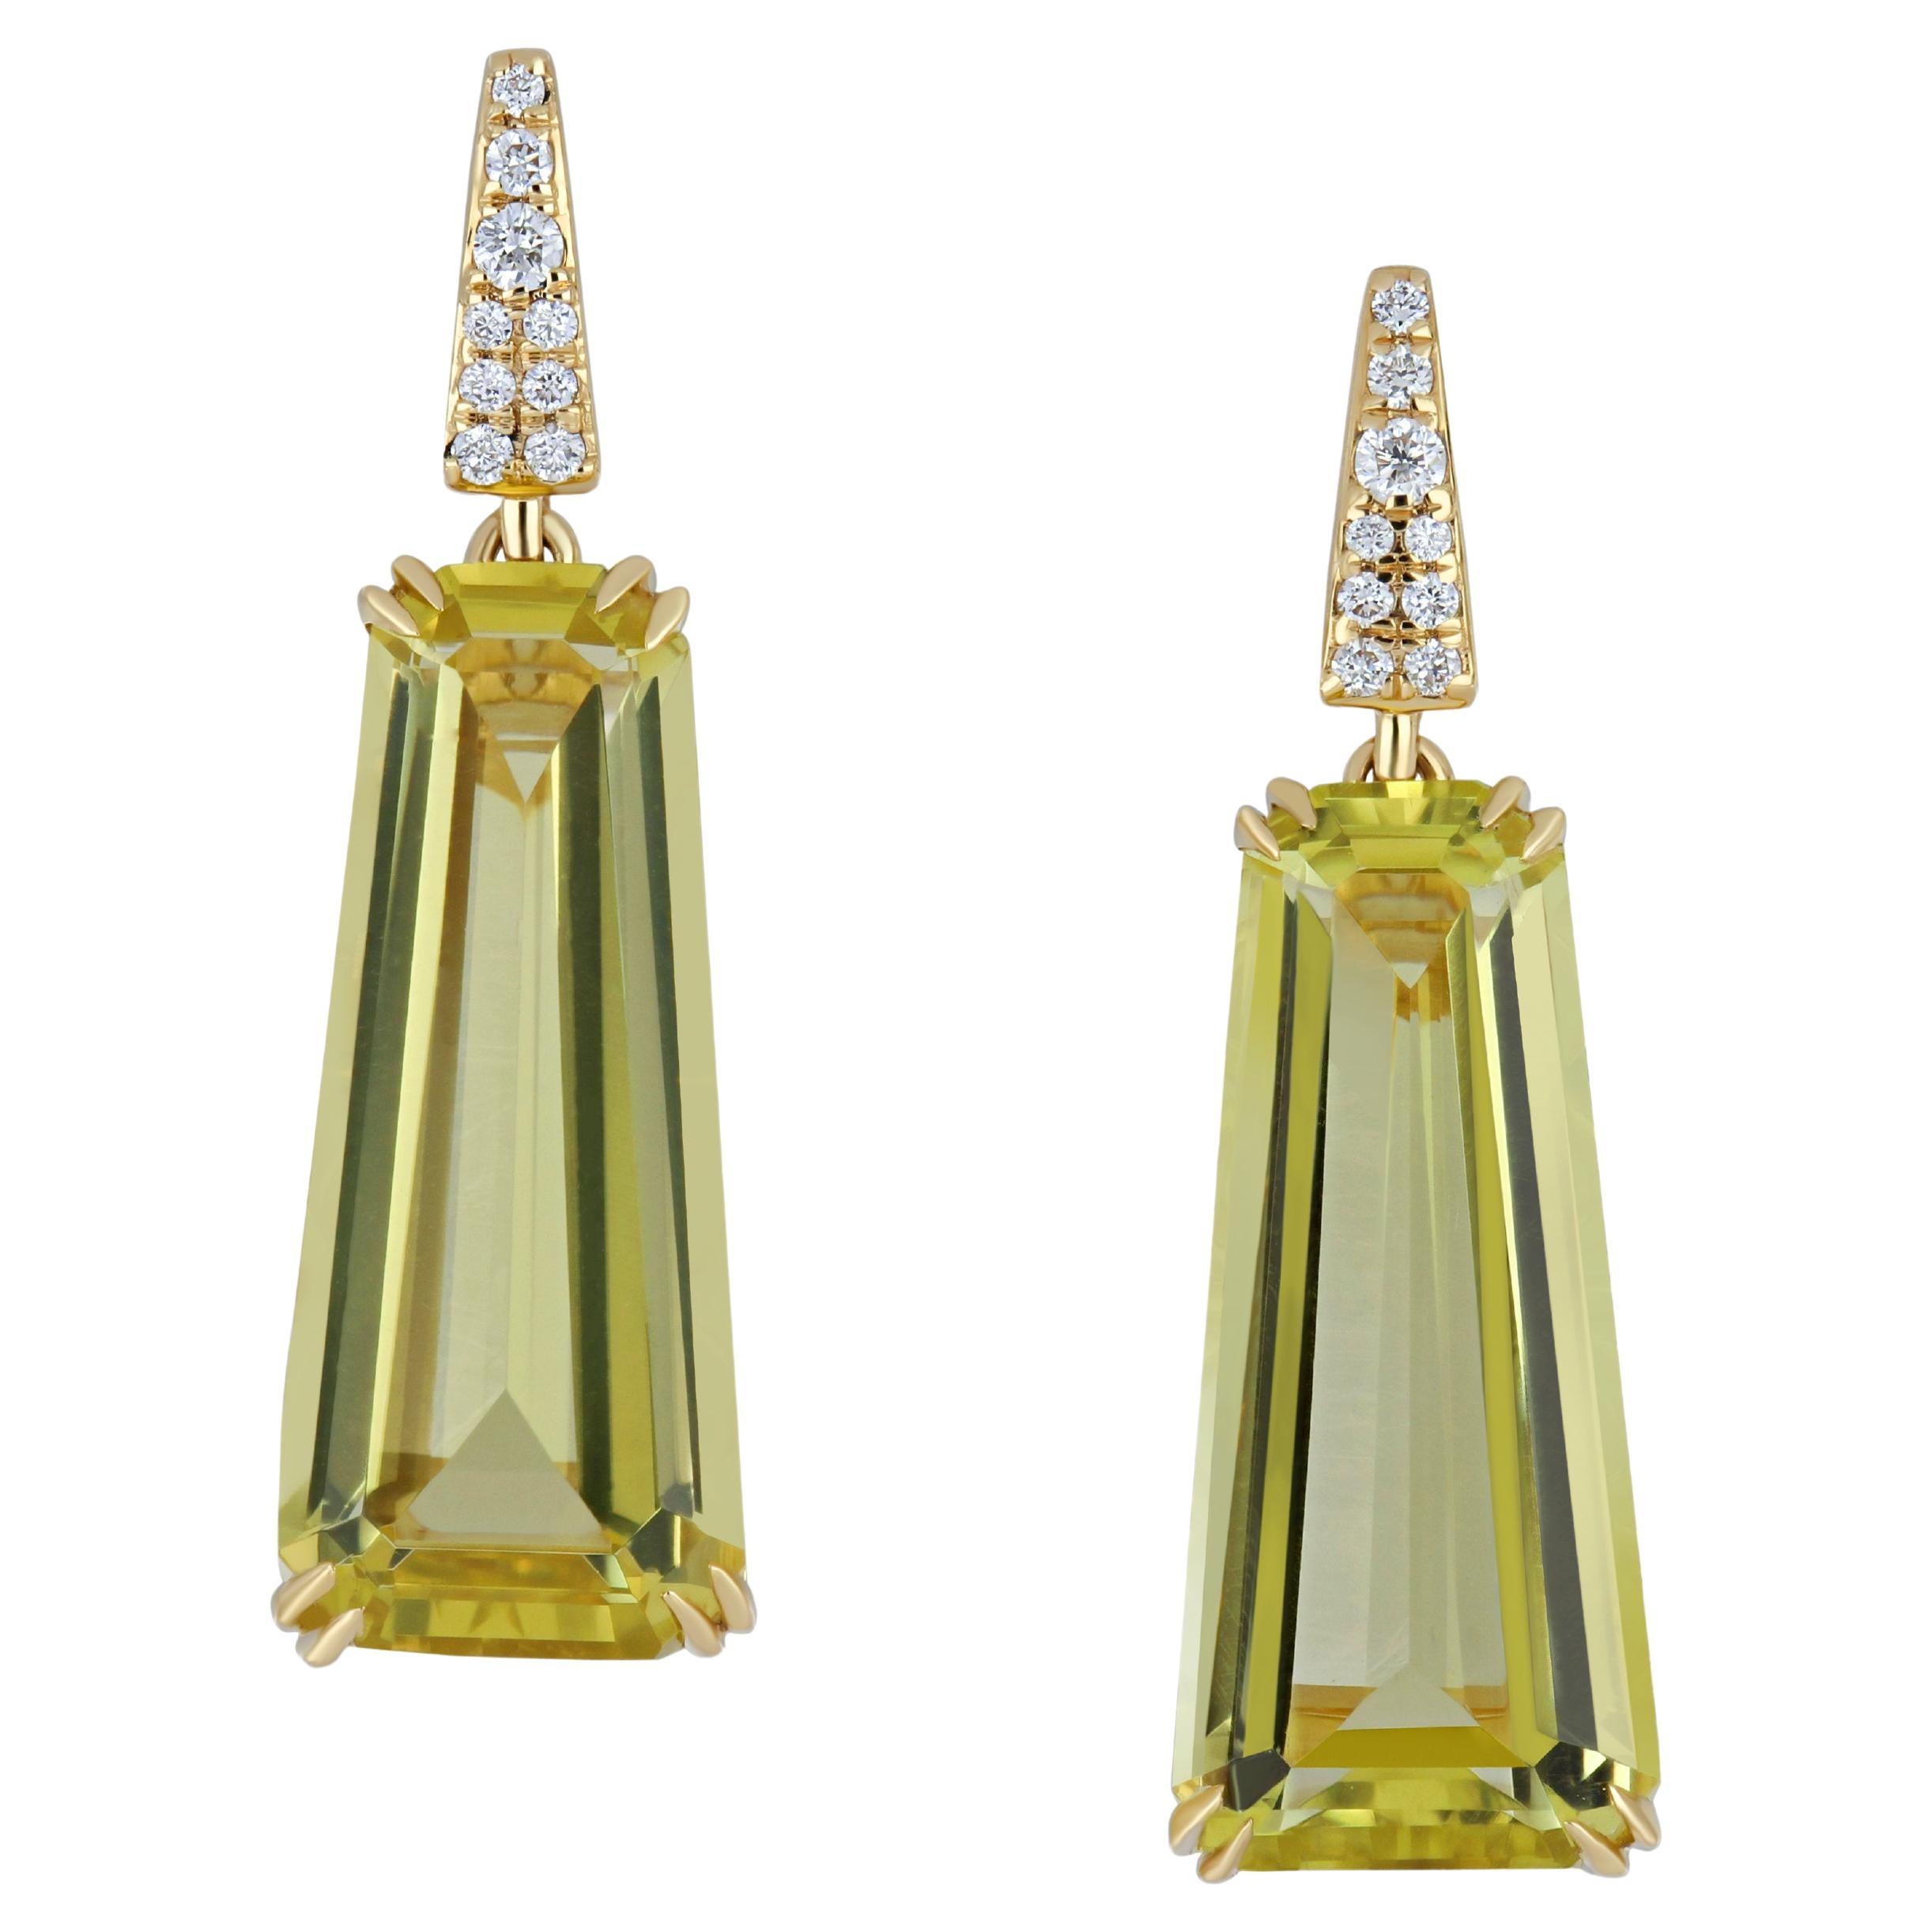 Exquisite 10.0 cts Lemon Quartz & Diamond Earrings, Handcrafted in 18K Gold For Sale